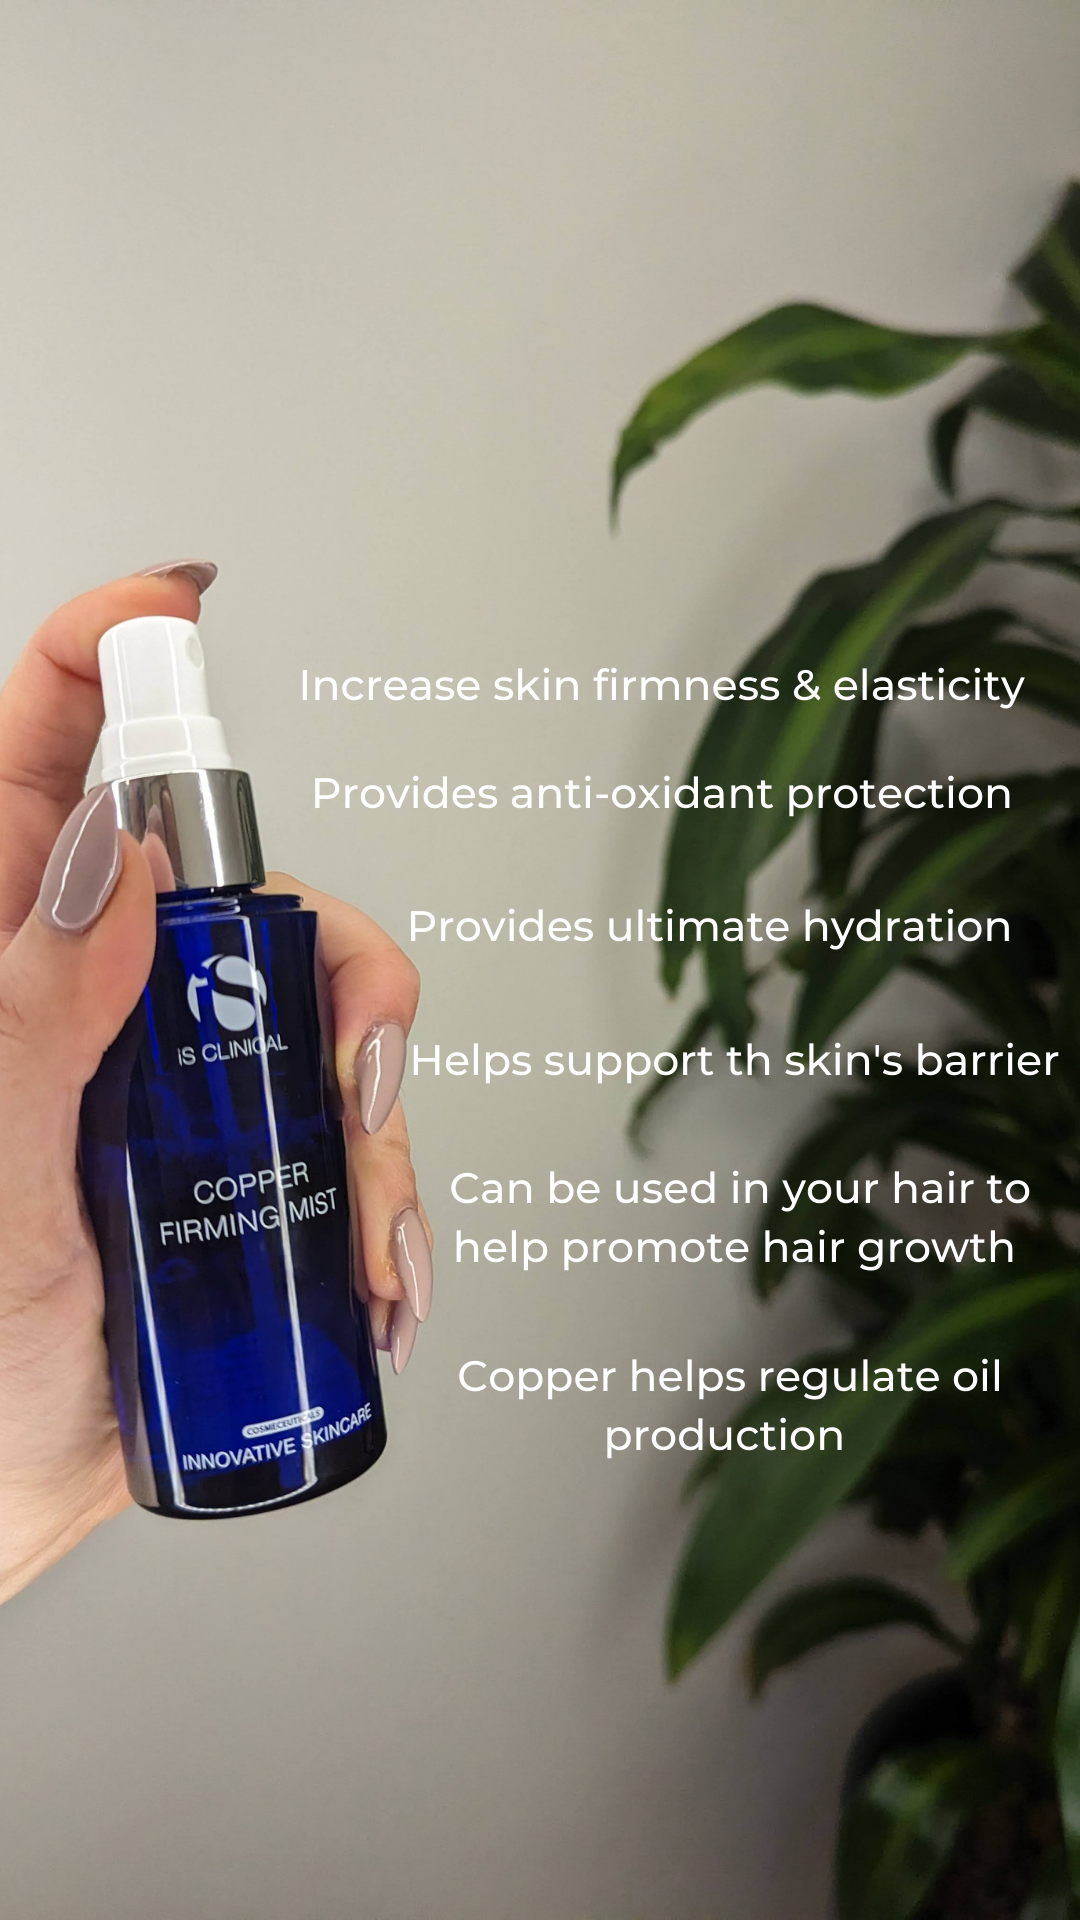 iS Clinical Copper Firming Mist